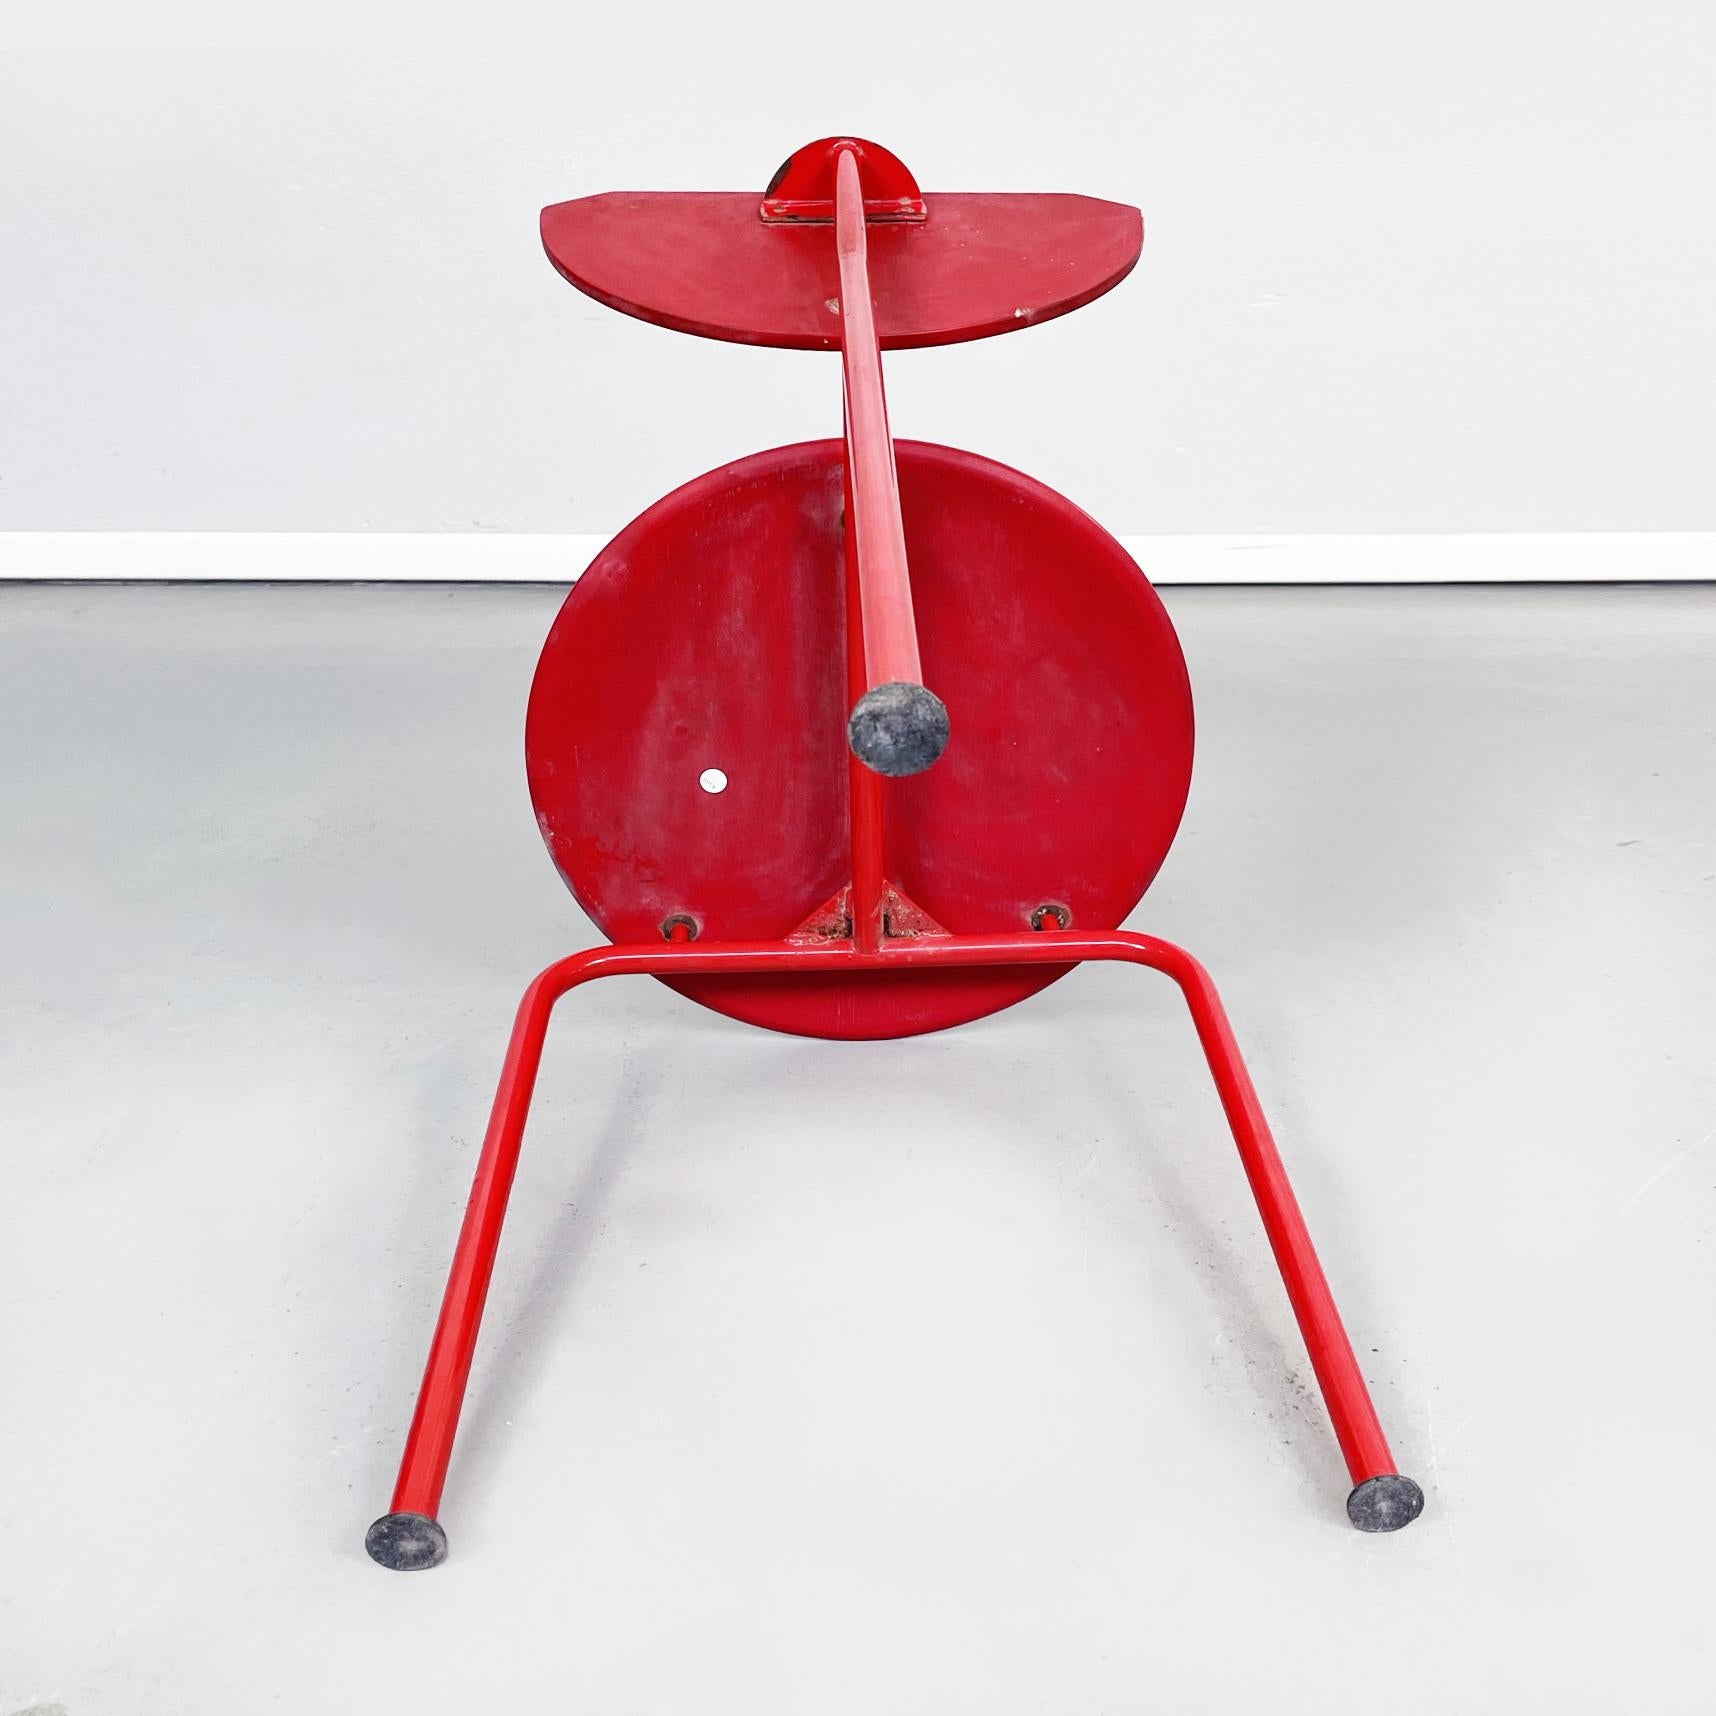 Italian Mid-Century Red Wood and Metal Alien Chair by Forcolini for Alias, 1980s For Sale 12